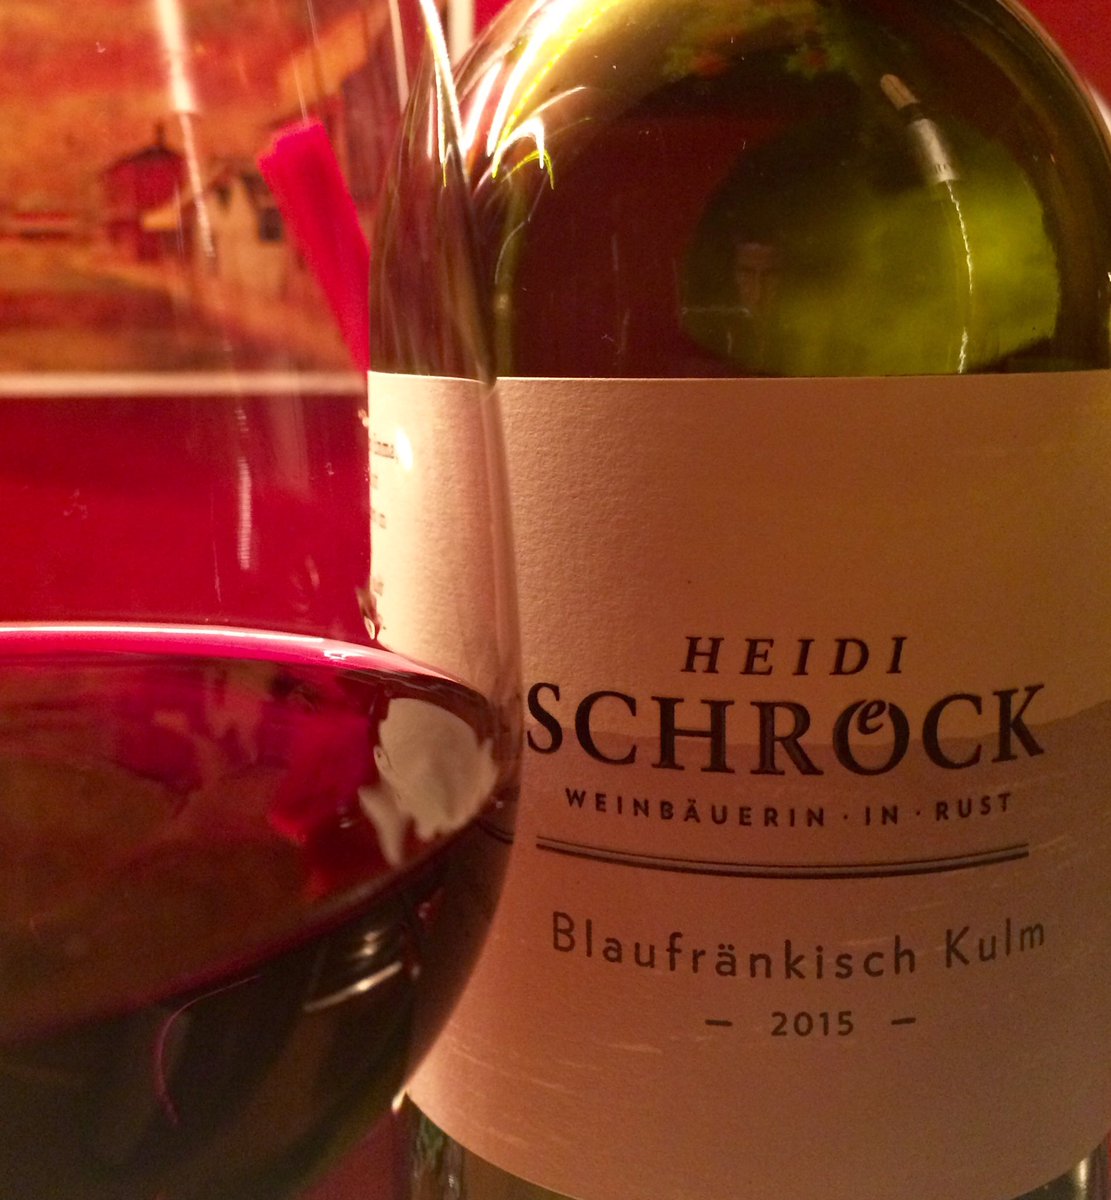 All elegant, acidity driven yet sumptuous red wine from a great producer famous for sweet wine. @HeidiSchroeck #blaufraenkisch #multitalent